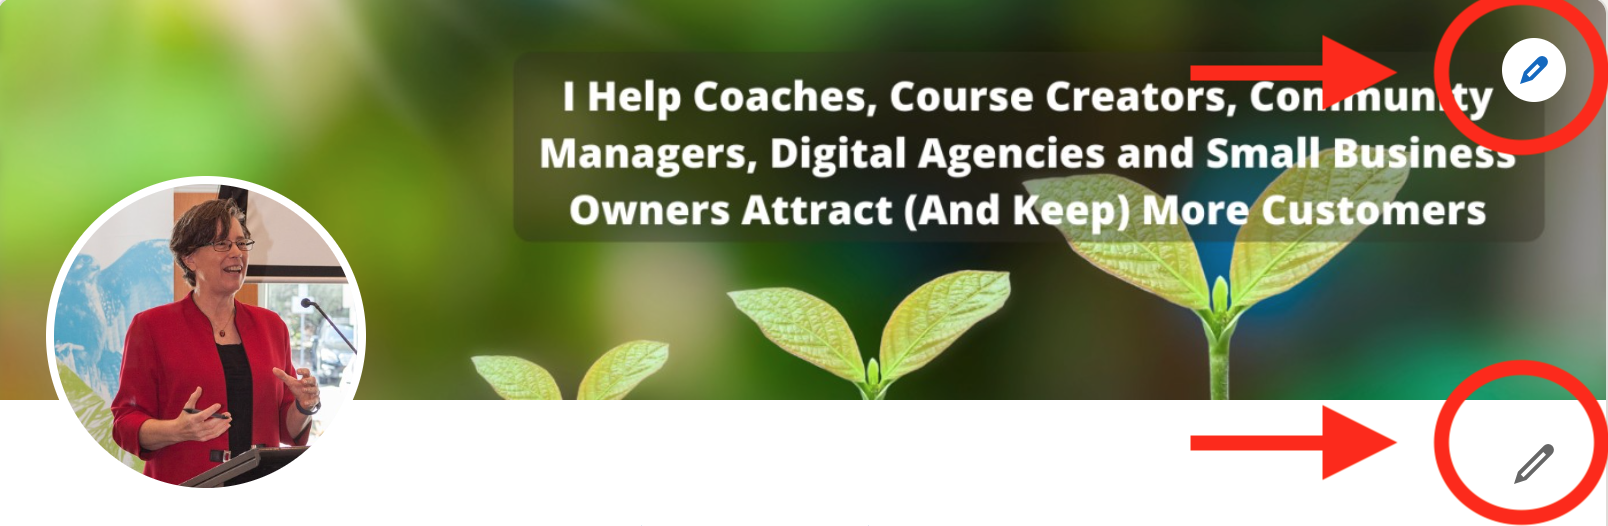 LinkedIn banner image that says says "I help coaches, course creators, community managers, digital agencies and small business owners attract and keep more customers.  There are also red arrows pointing to the little edit pencils.